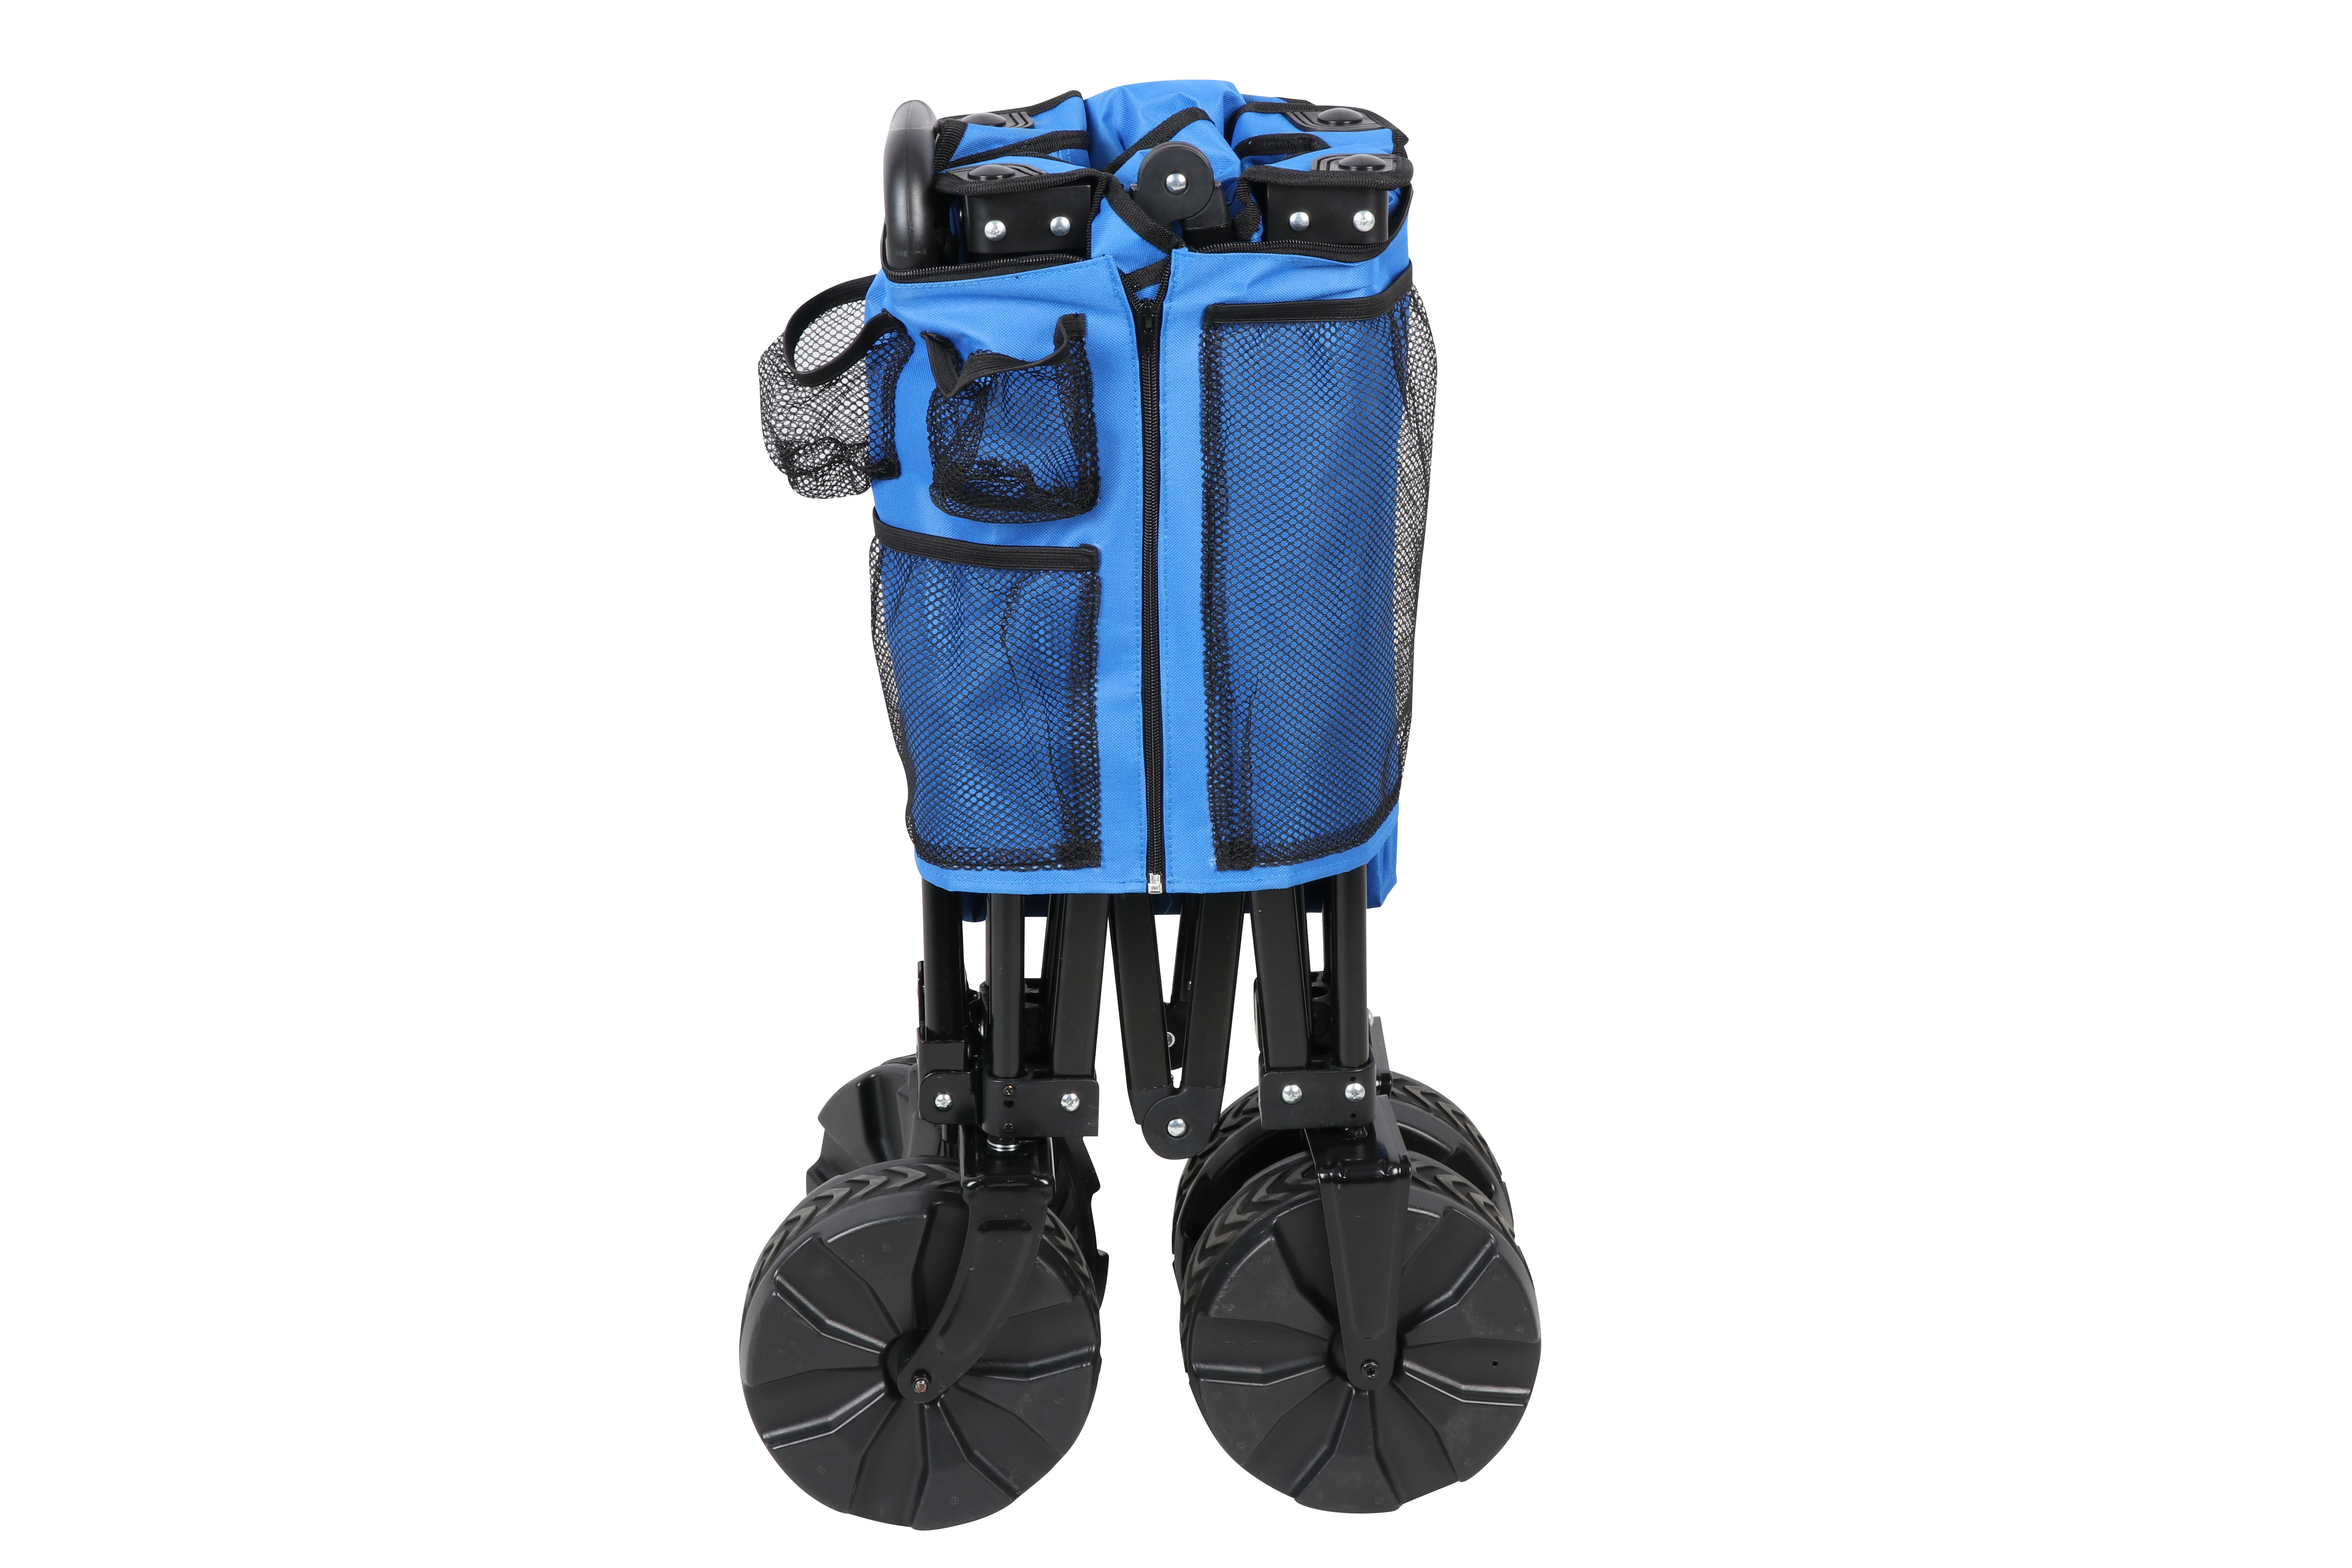 Ozark Trail Camping All-Terrain Folding Wagon with Oversized Wheels, Blue - image 3 of 11